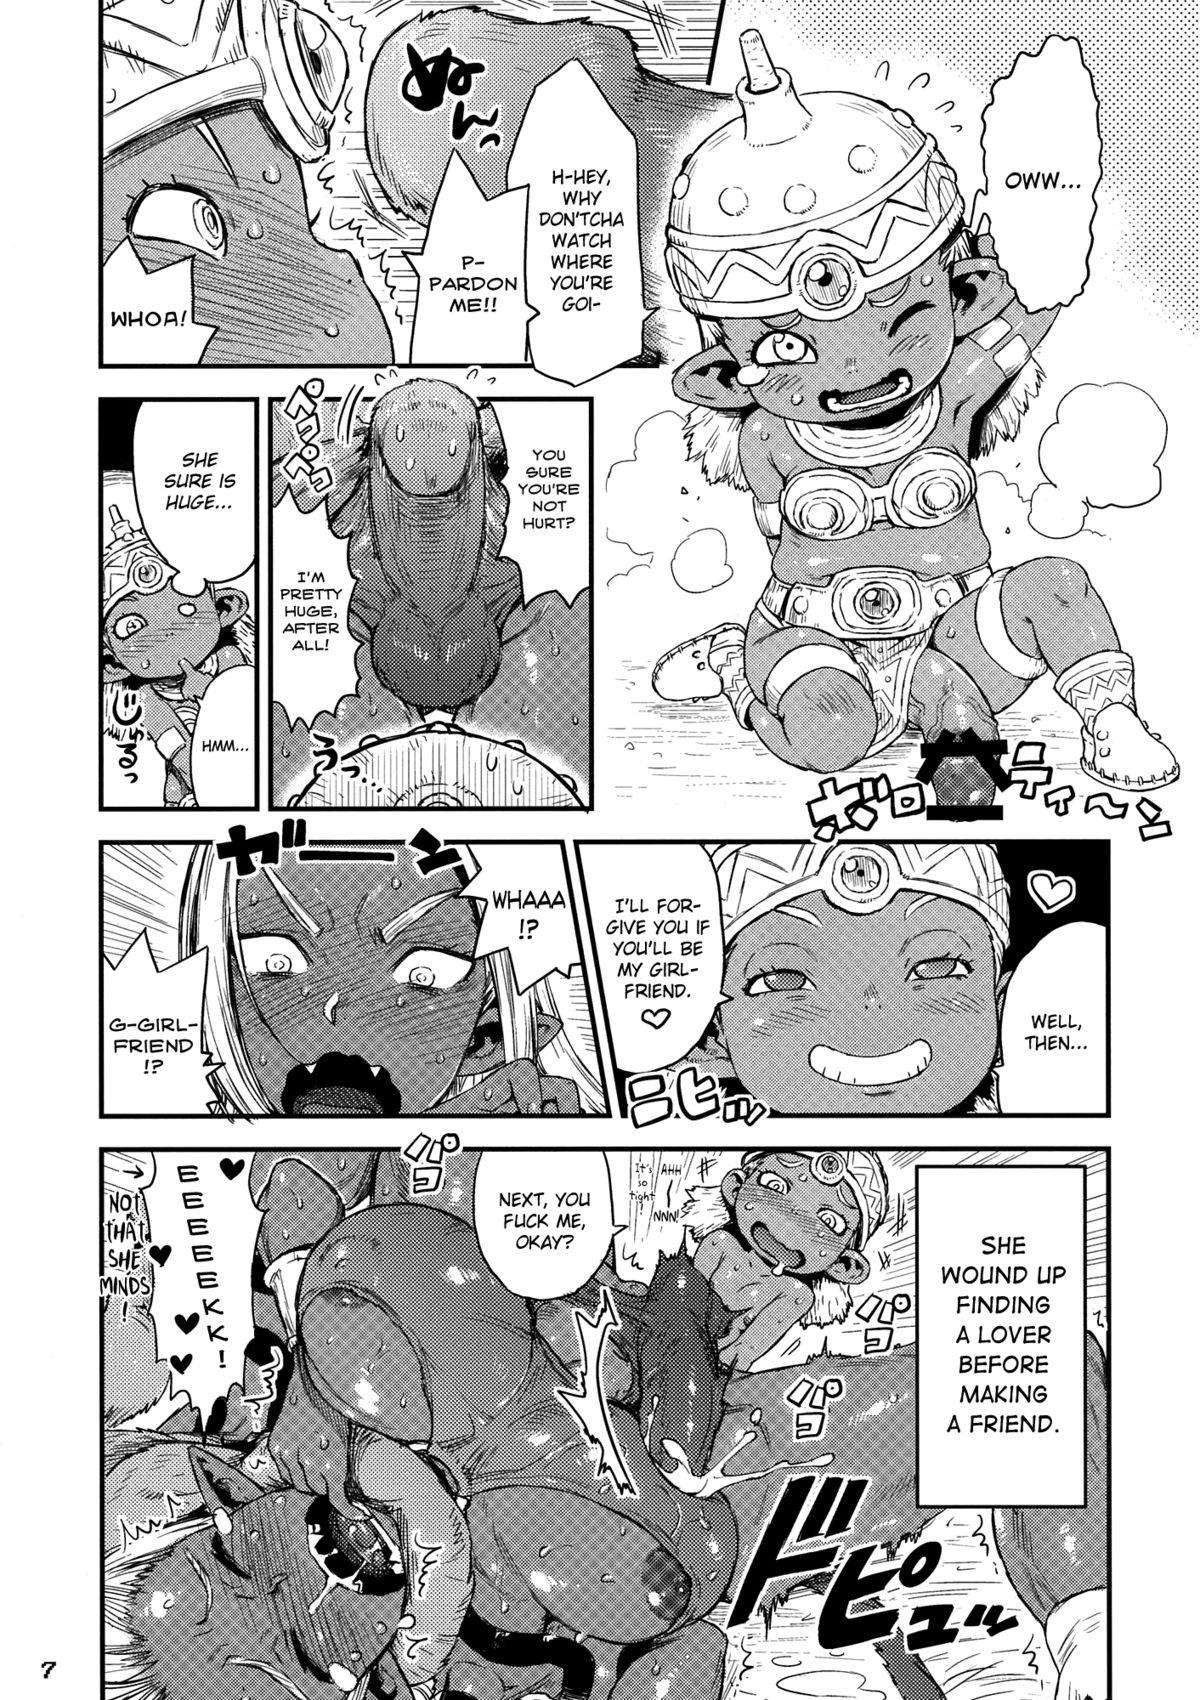 Pay Manya & Ogre FPS β - Dragon quest x Outside - Page 7